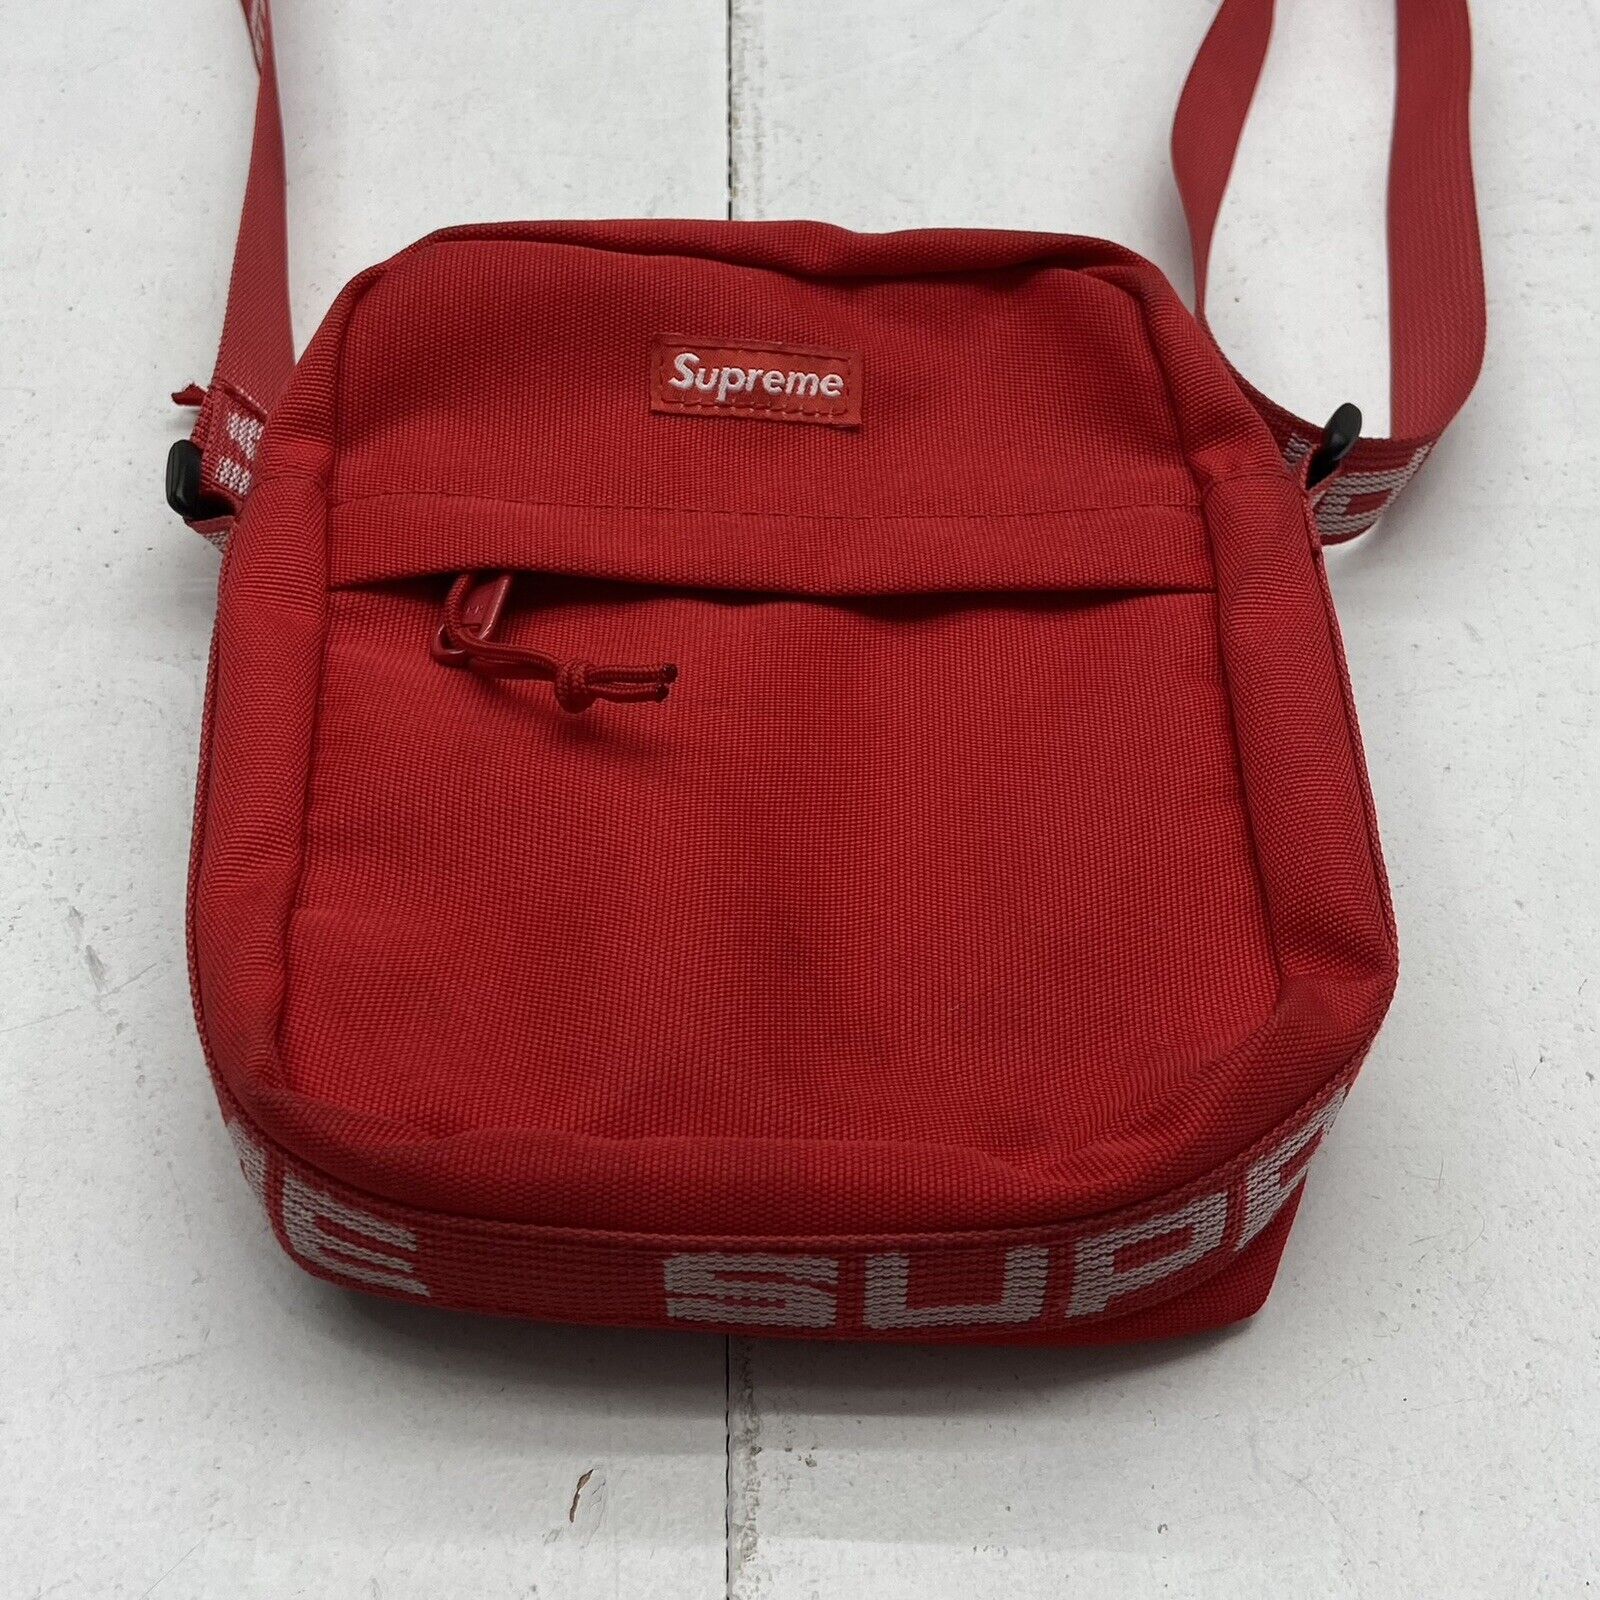 Supreme Backpack - Authentic Cordura - Red